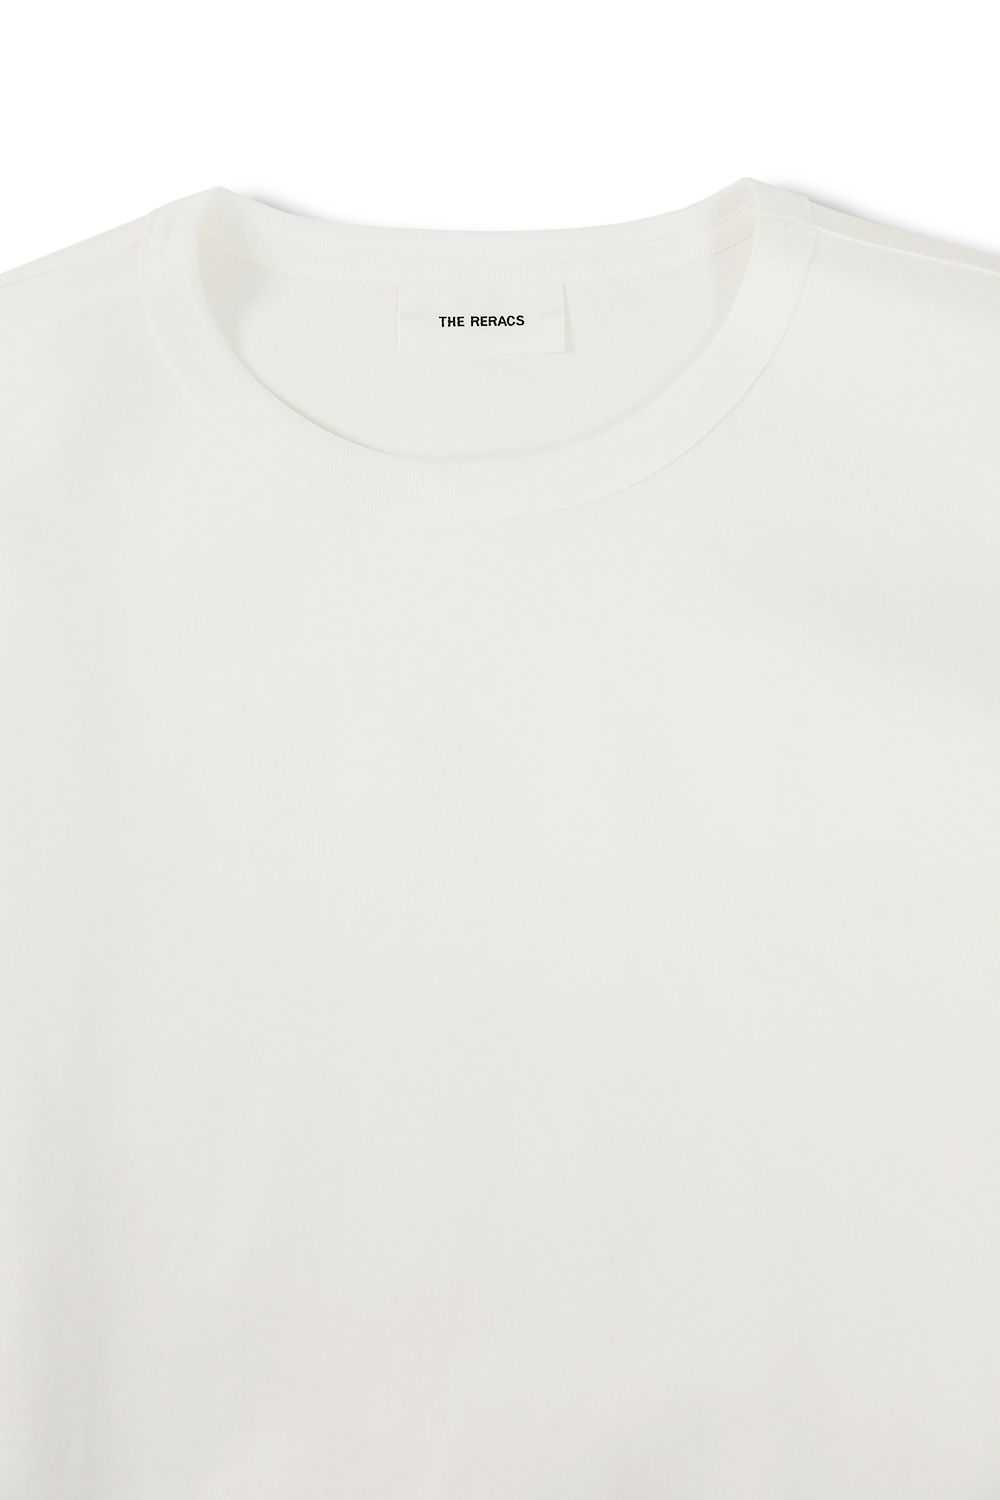 THE RERACS - 【ラスト1点】THE SUPER OVER SIZE T-SHIRT(WHITE